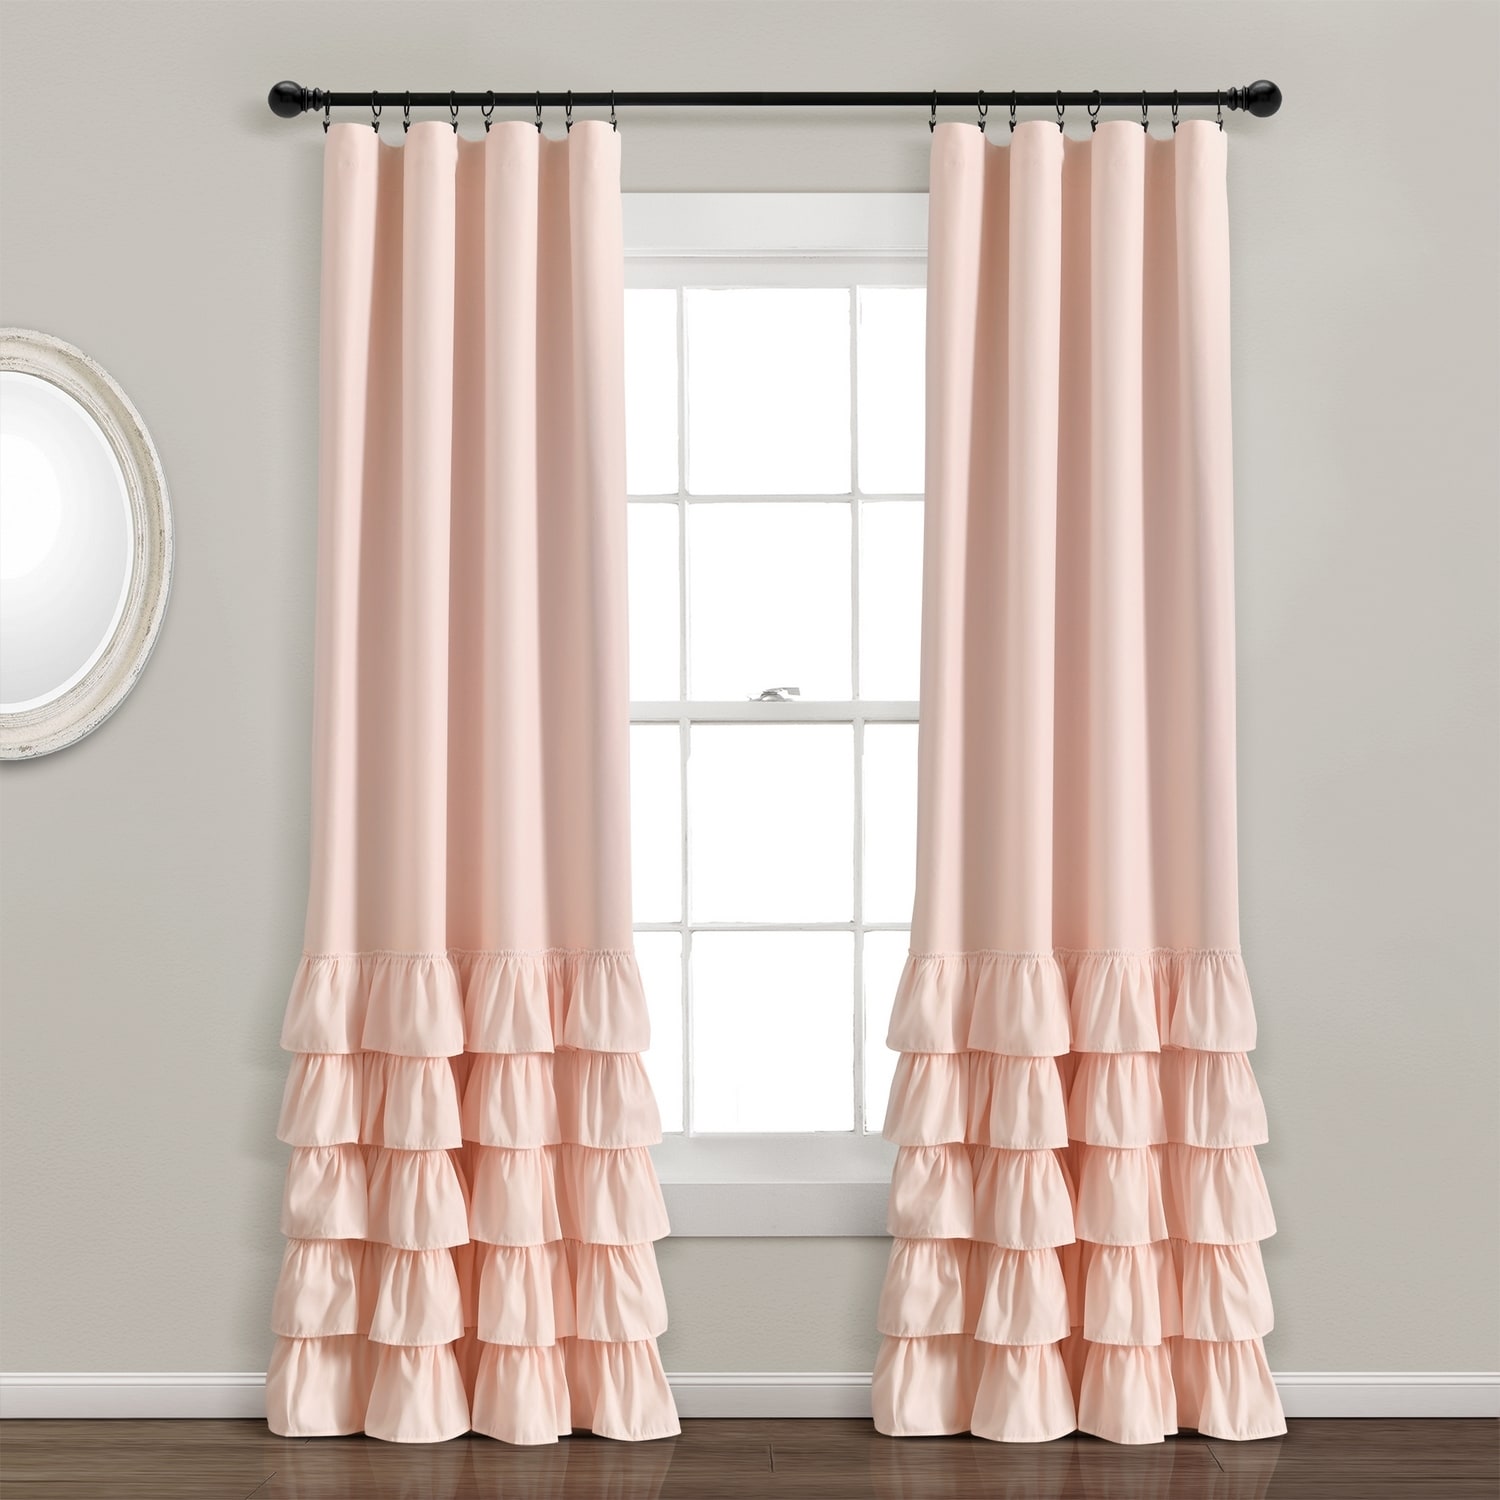 Lush Decor 84 In Blush Blackout Standard Lined Rod Pocket Single Curtain Panel The Curtains Ds Department At Lowes Com